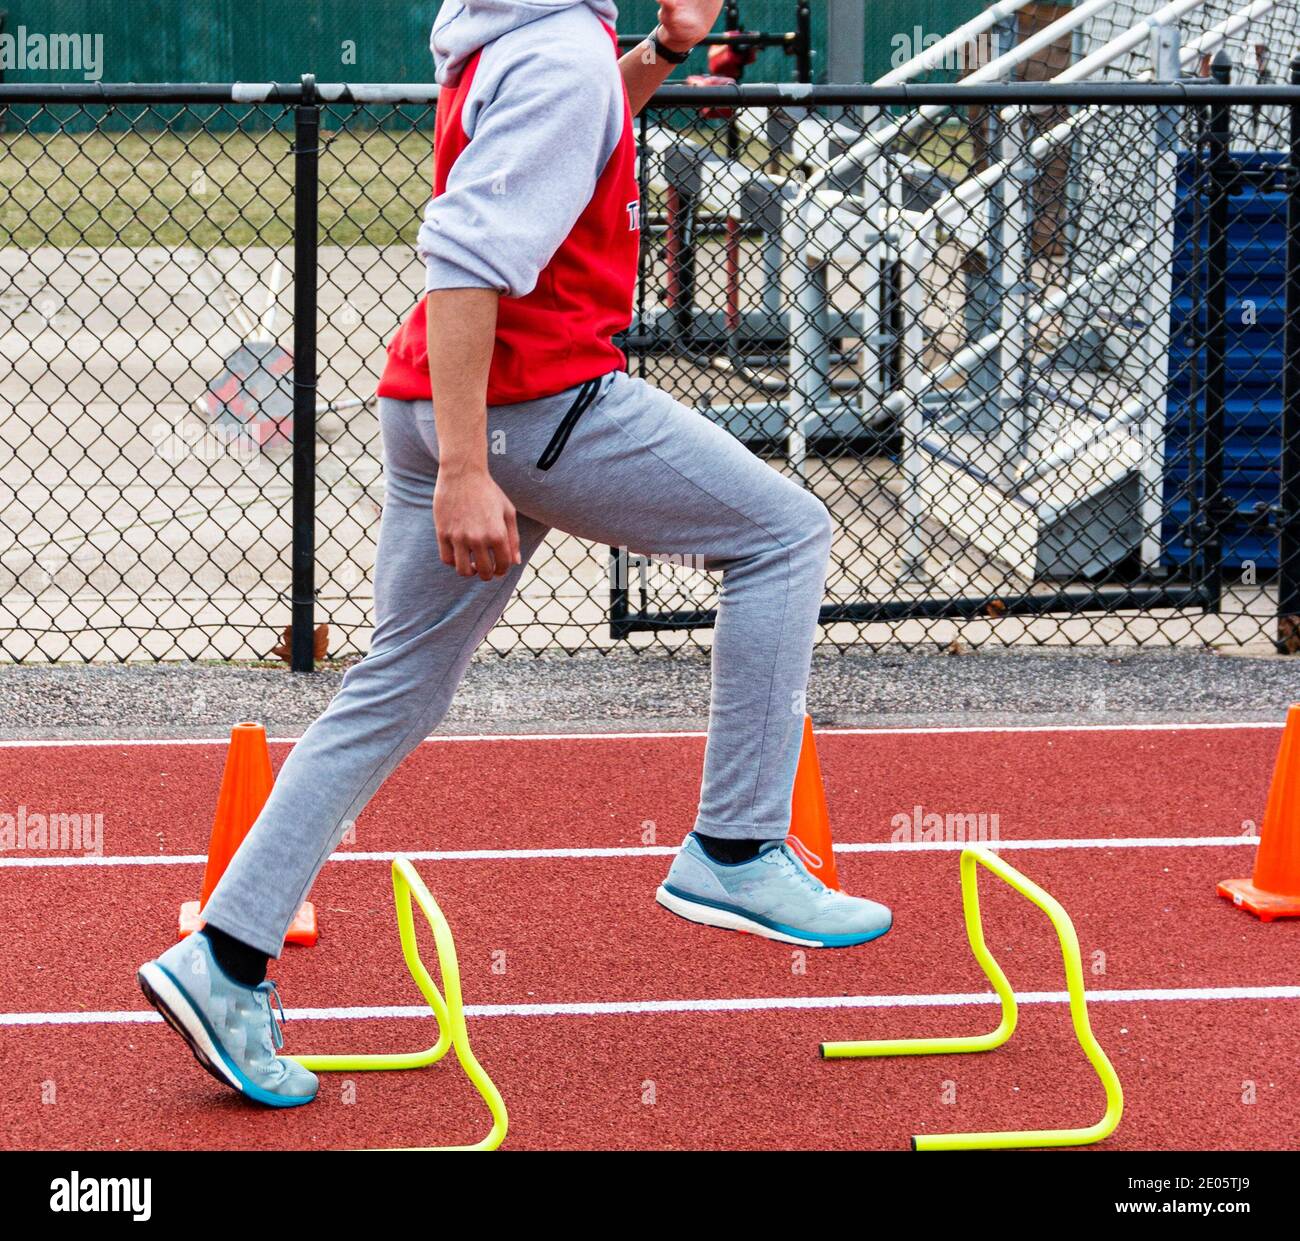 A high school track and field biy is running over yellow mini hurdles on a red track. Stock Photo